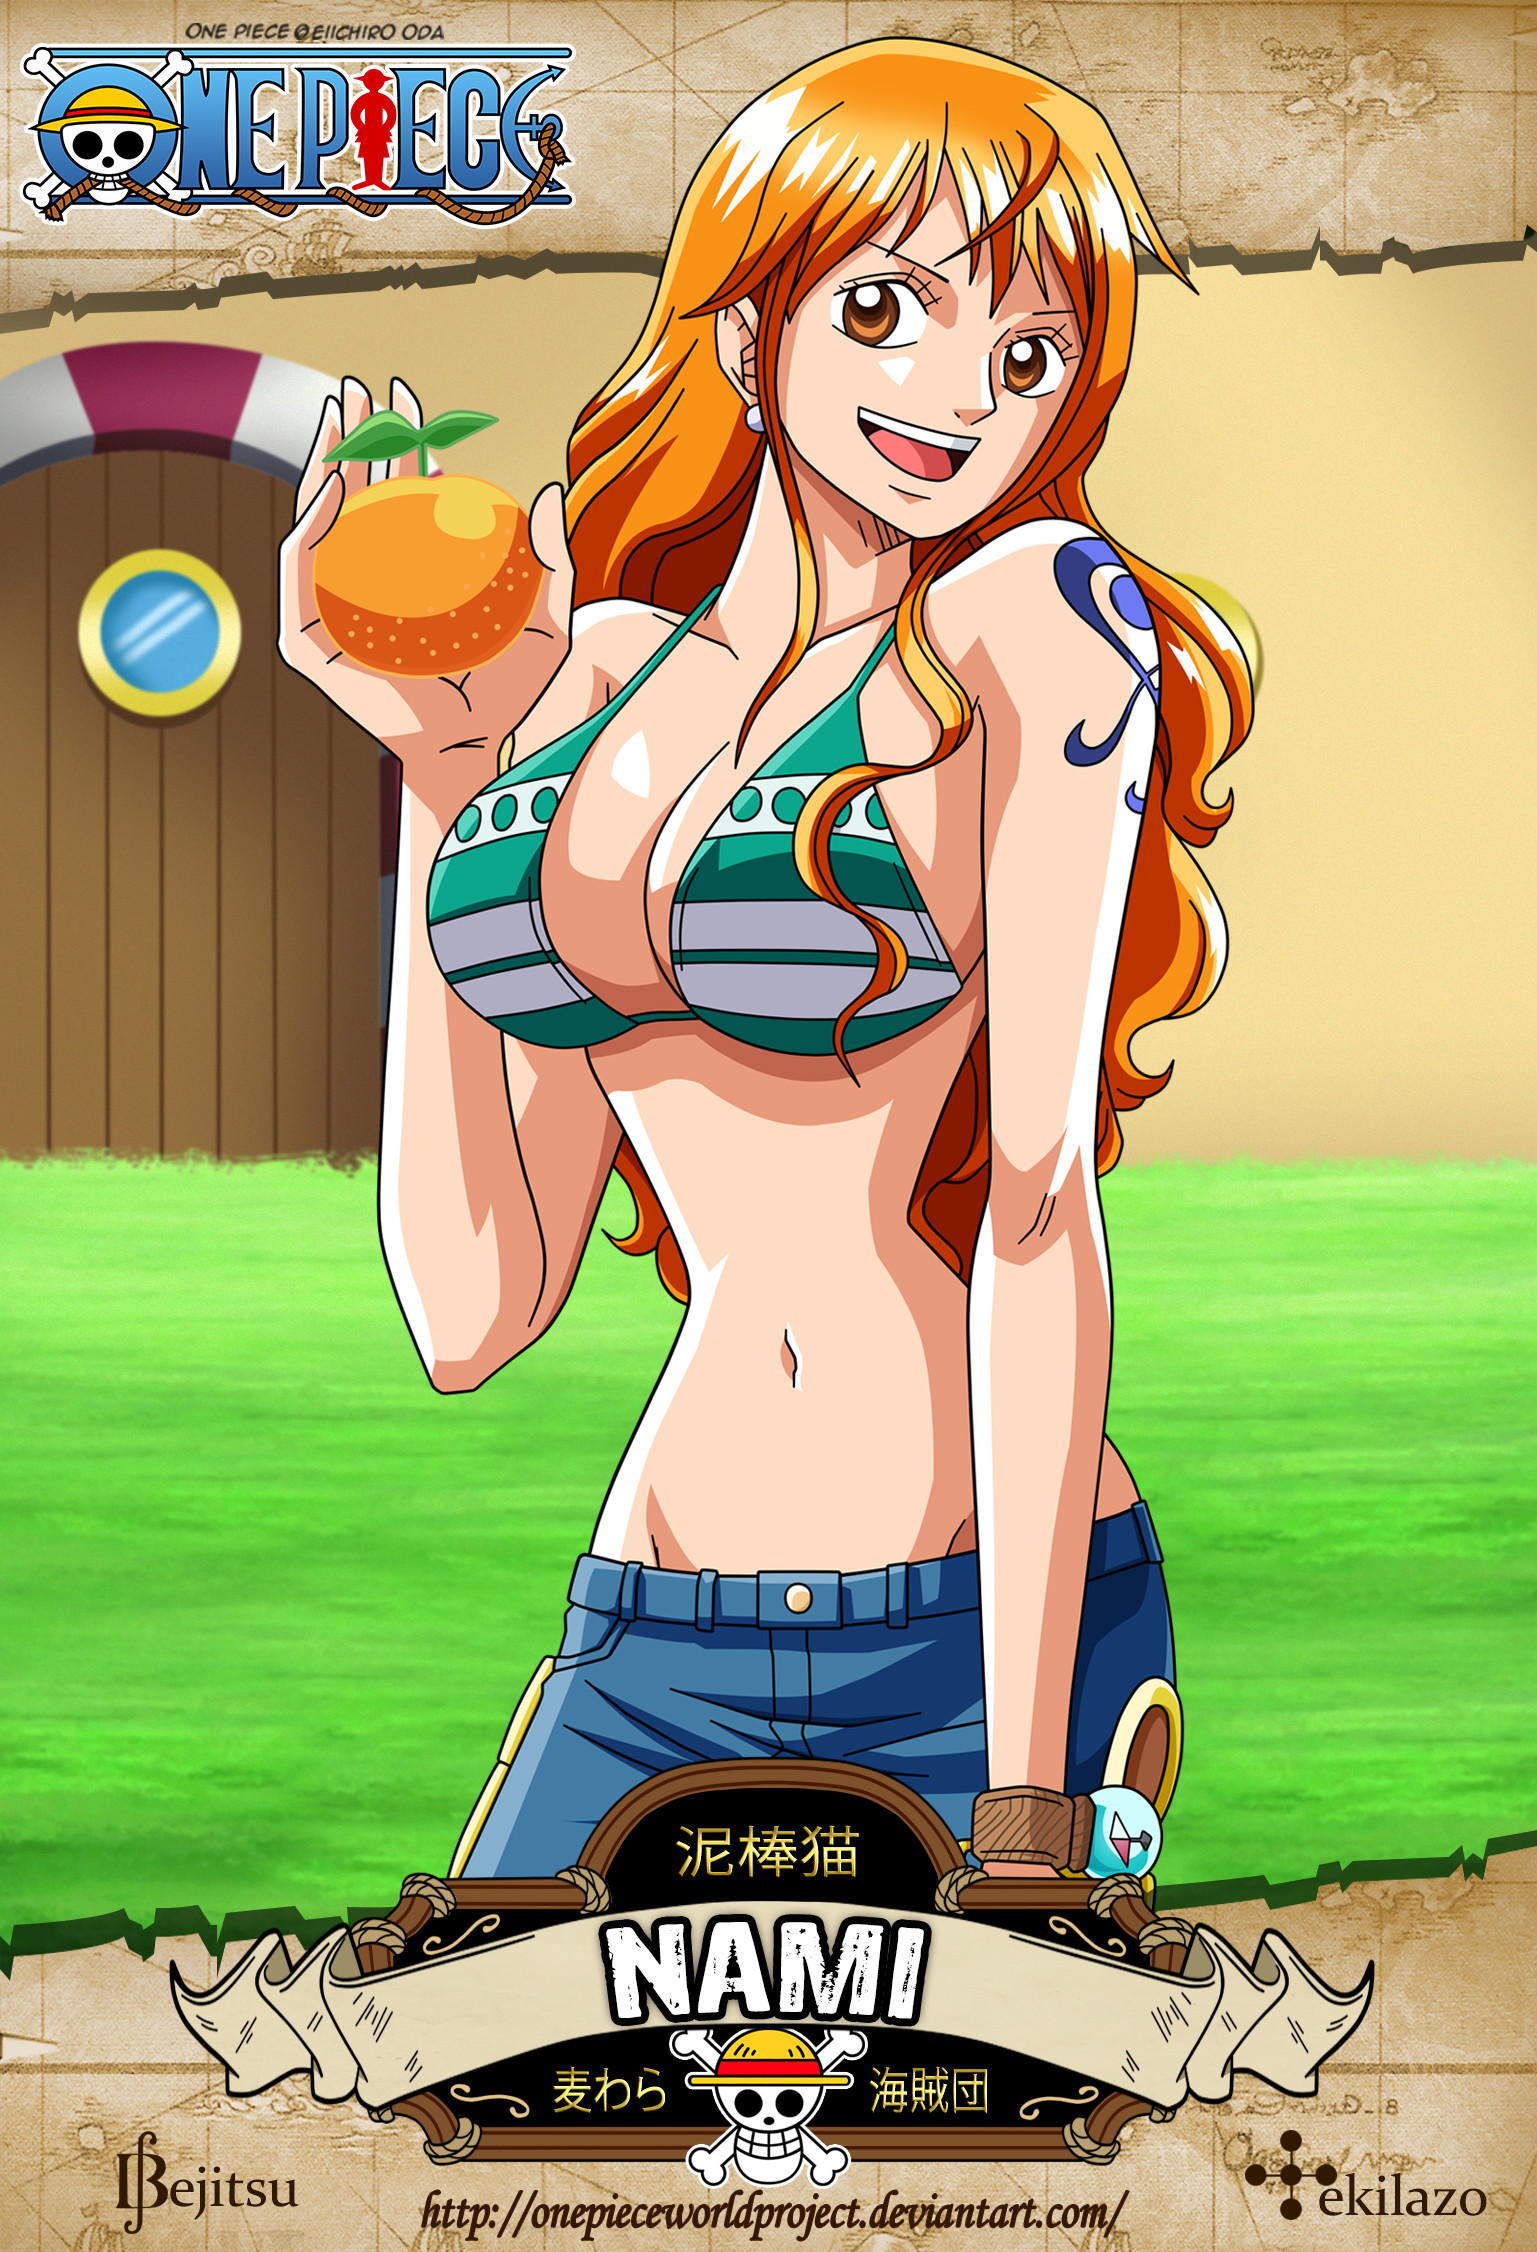 1537x2252 One Piece - Nami by OnePieceWorldProject One Piece - Nami by  OnePieceWorldProject